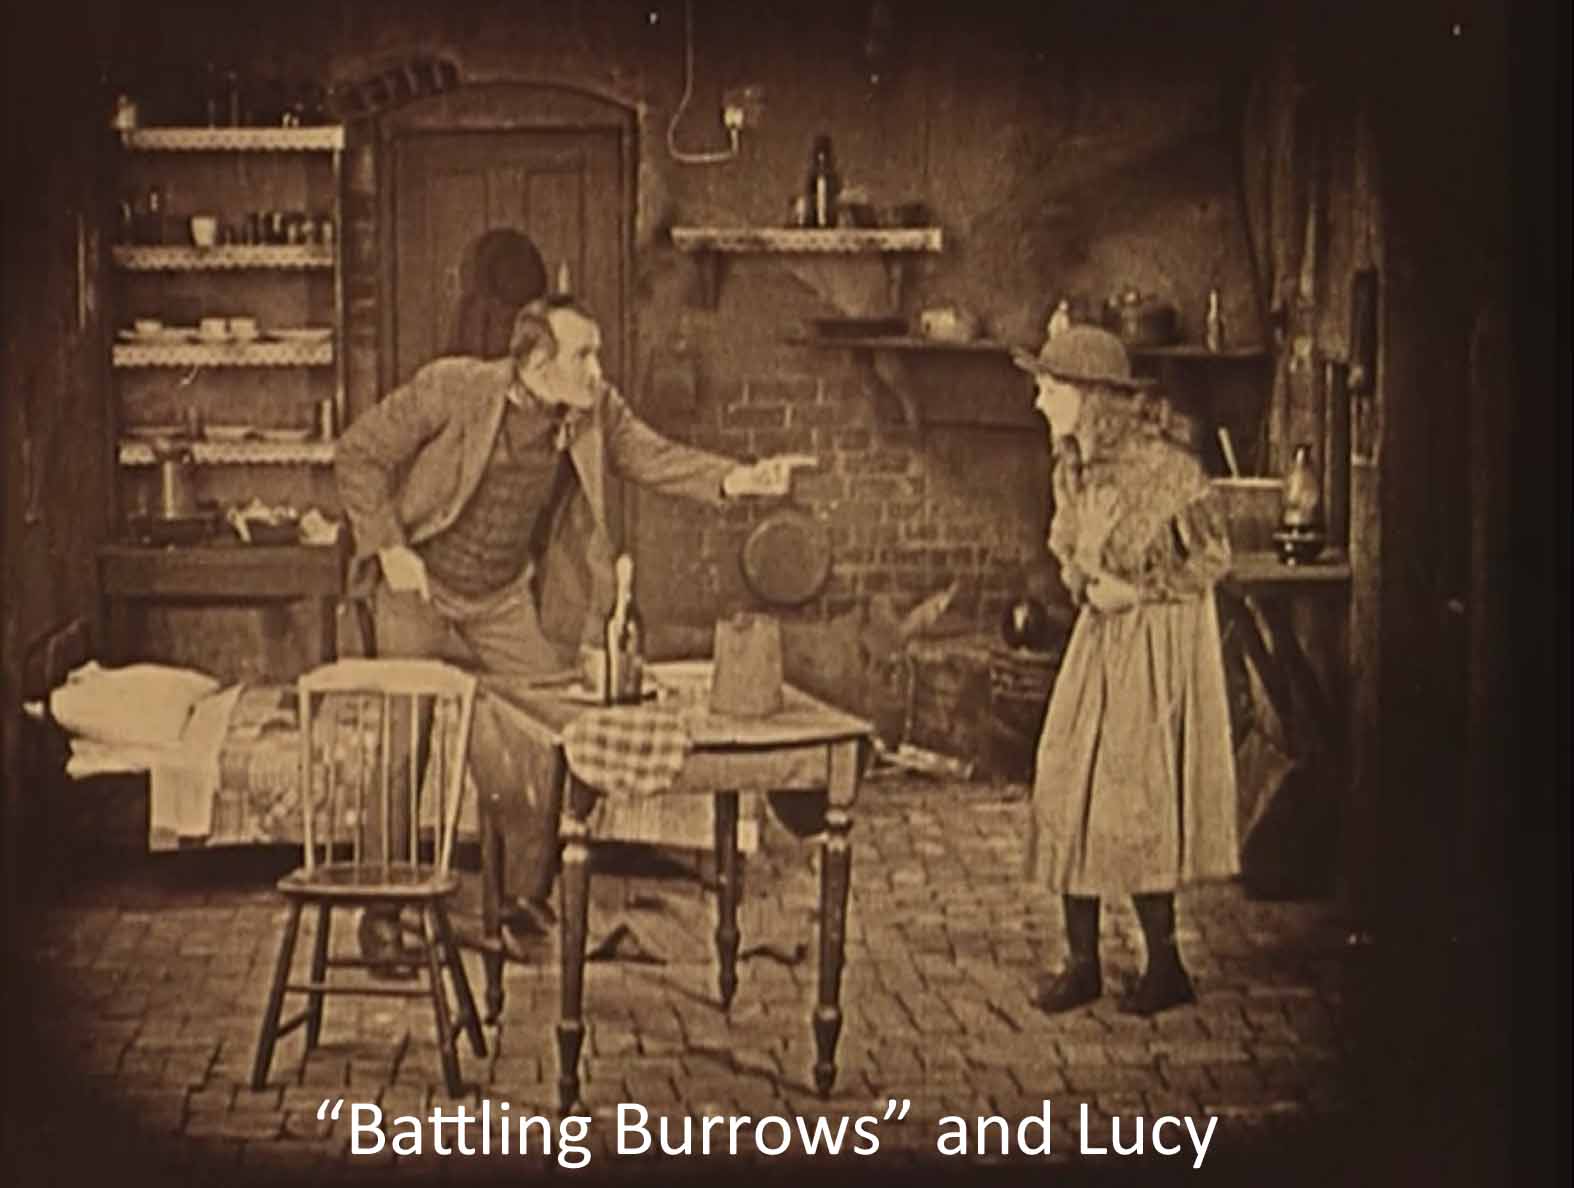 Battling Burrows and Lucy